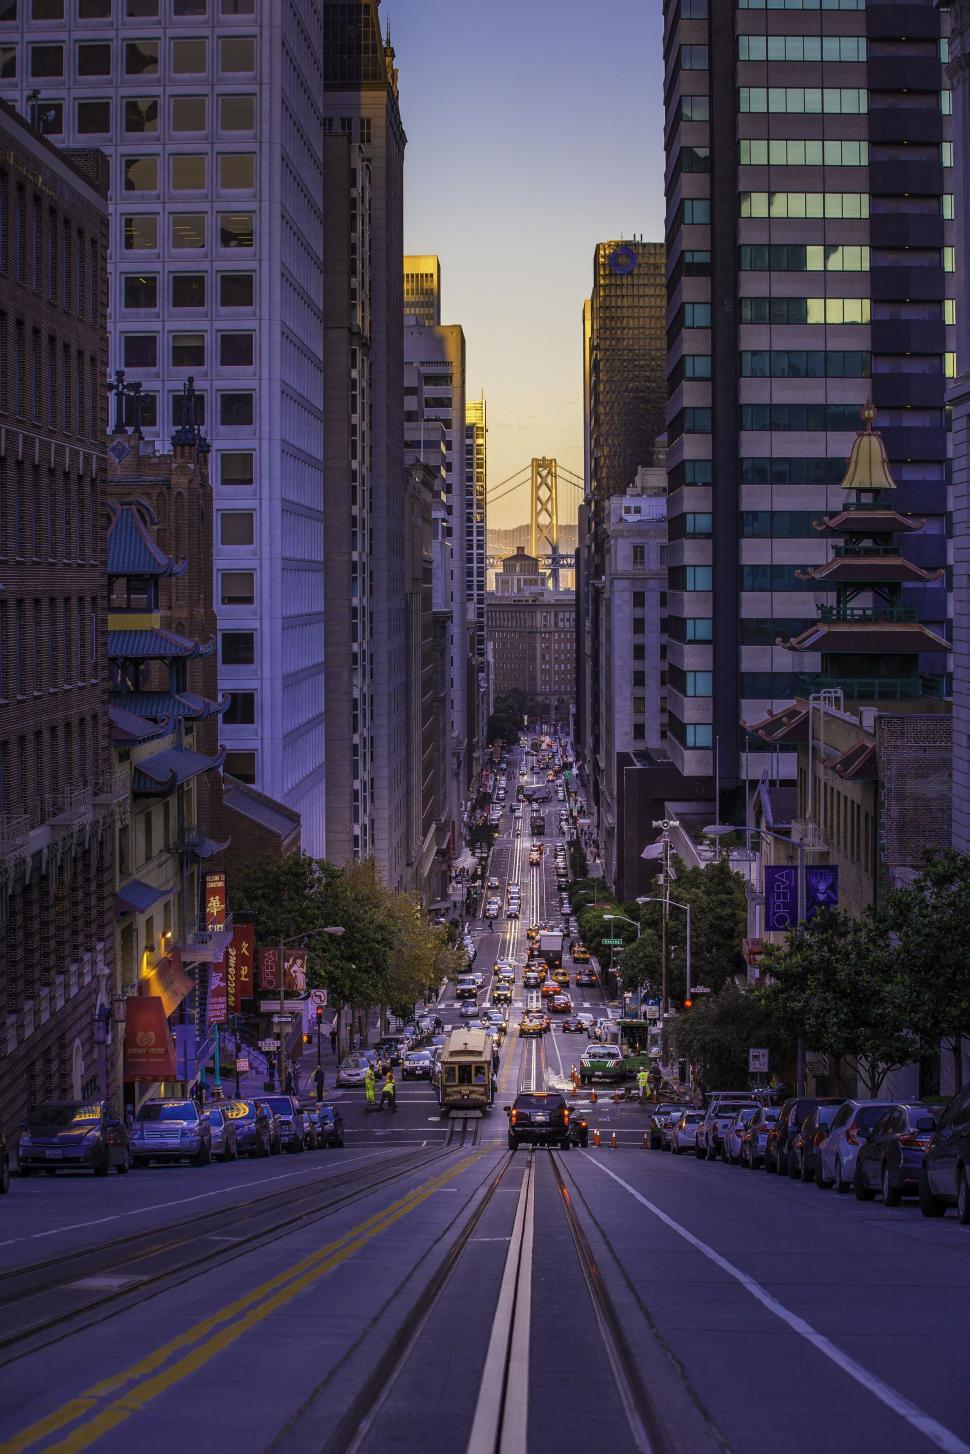 Free Image of Road in San Francisco  